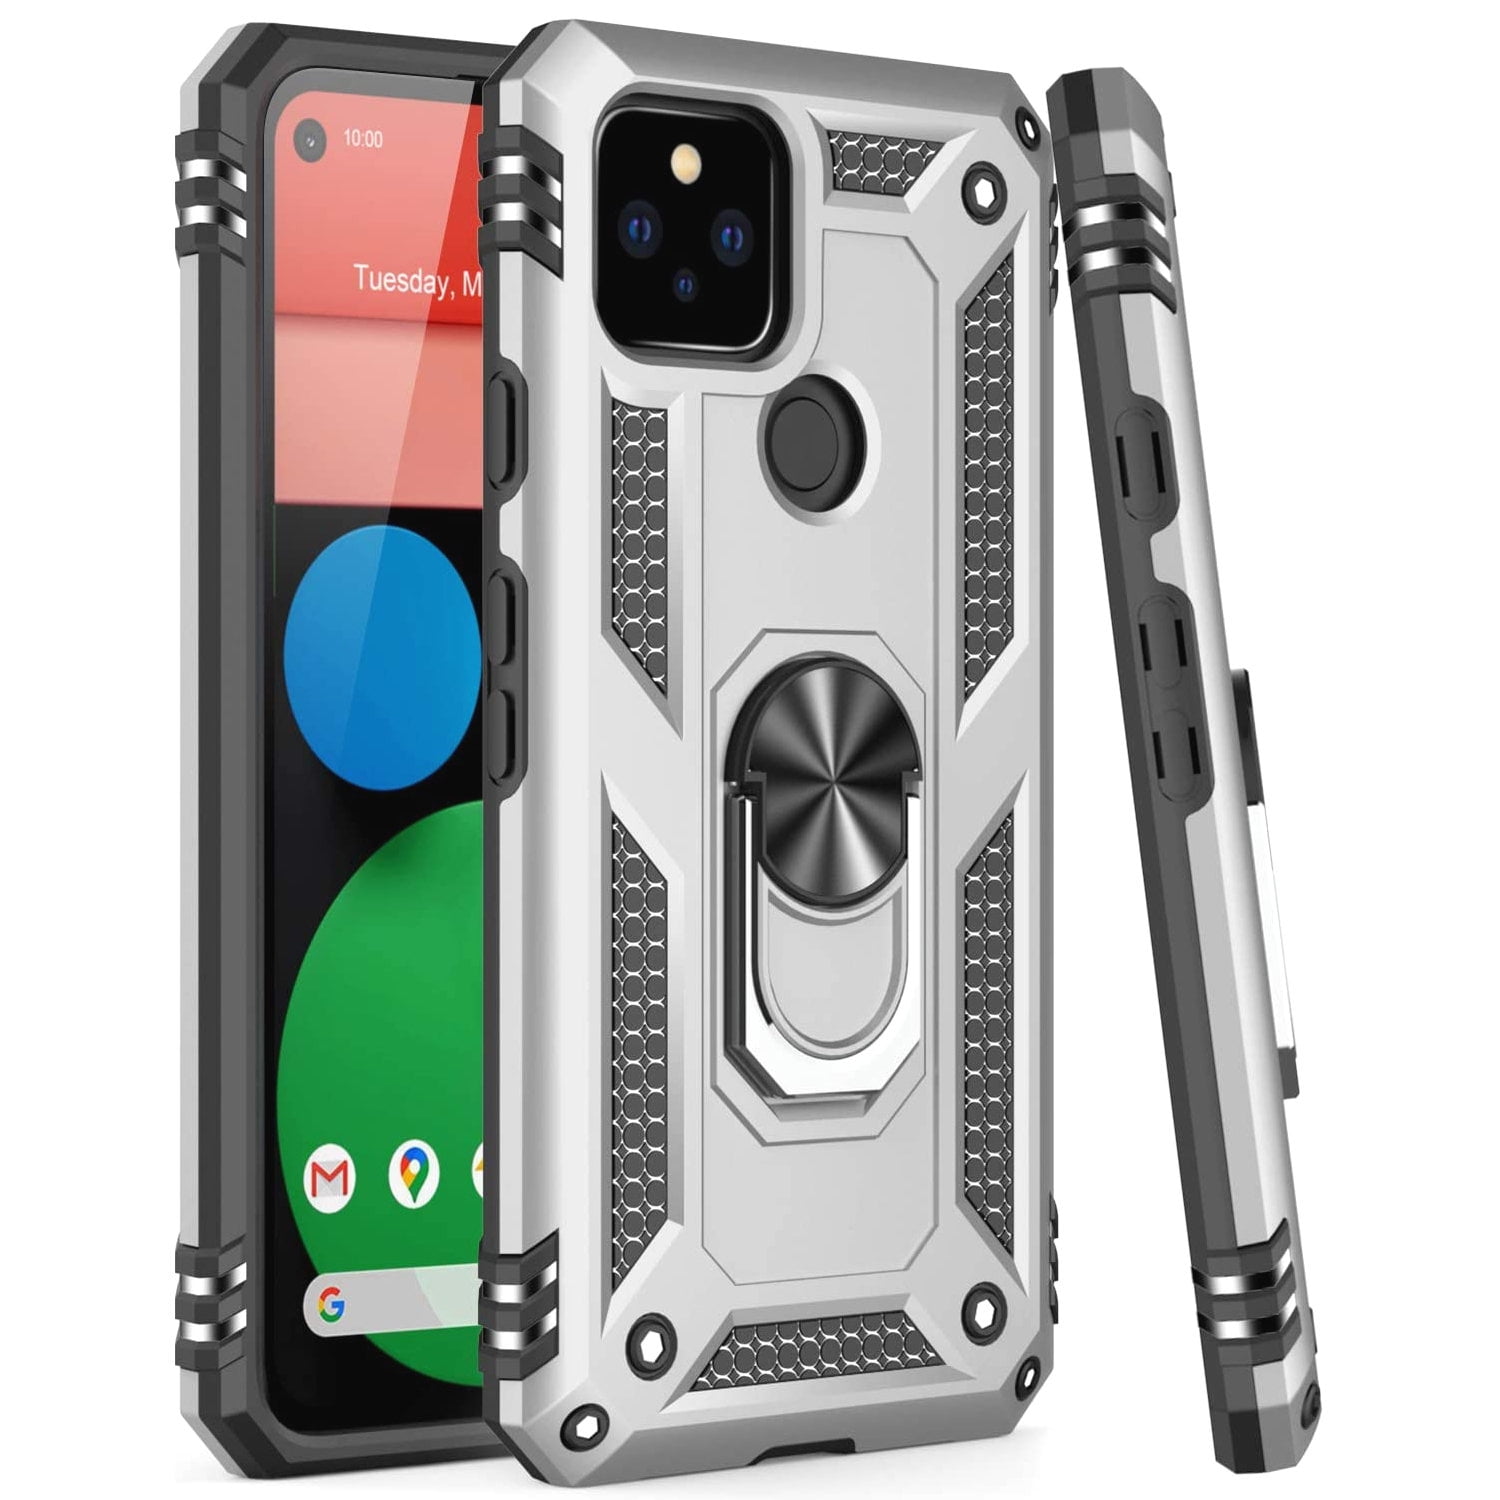 Armor Dual Layer 2 in 1 and Finger Ring Holder Kickstand Fit Magnetic Car Mount for Google Pixel 3 XL-Rose Gold DLseego Google Pixel 3 XL Case